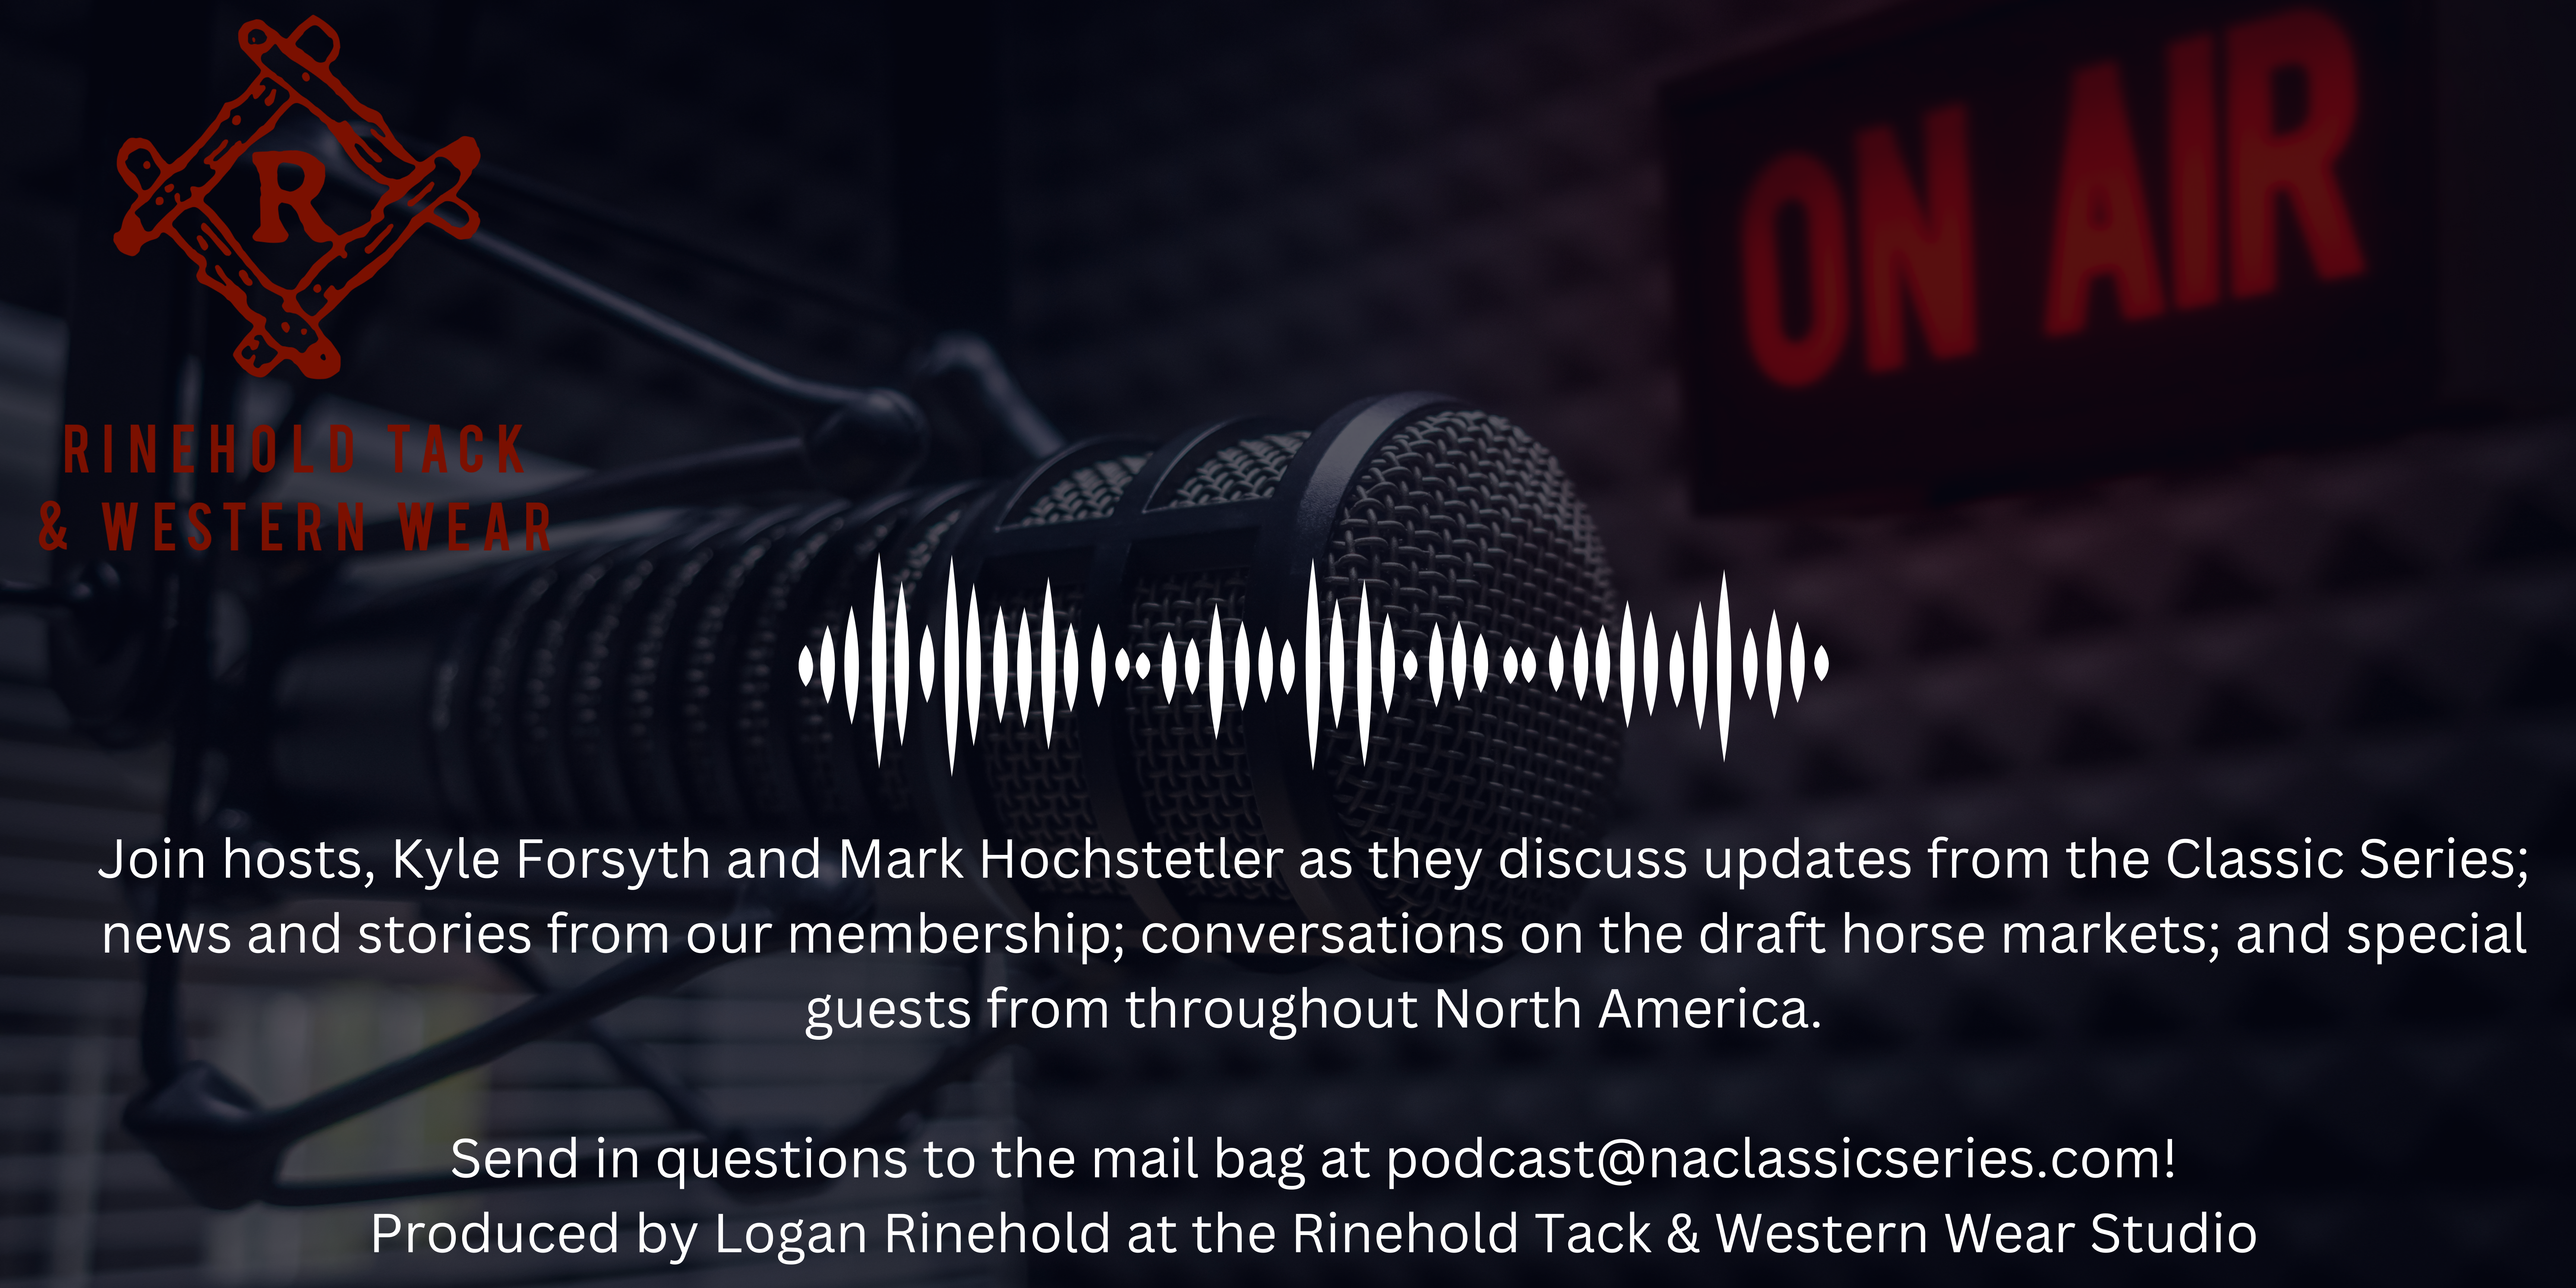 Join hosts, Kyle Forsyth and Mark ochstetler for Classic Series updates; news and stories from membership; and conversations with special guests. (1)